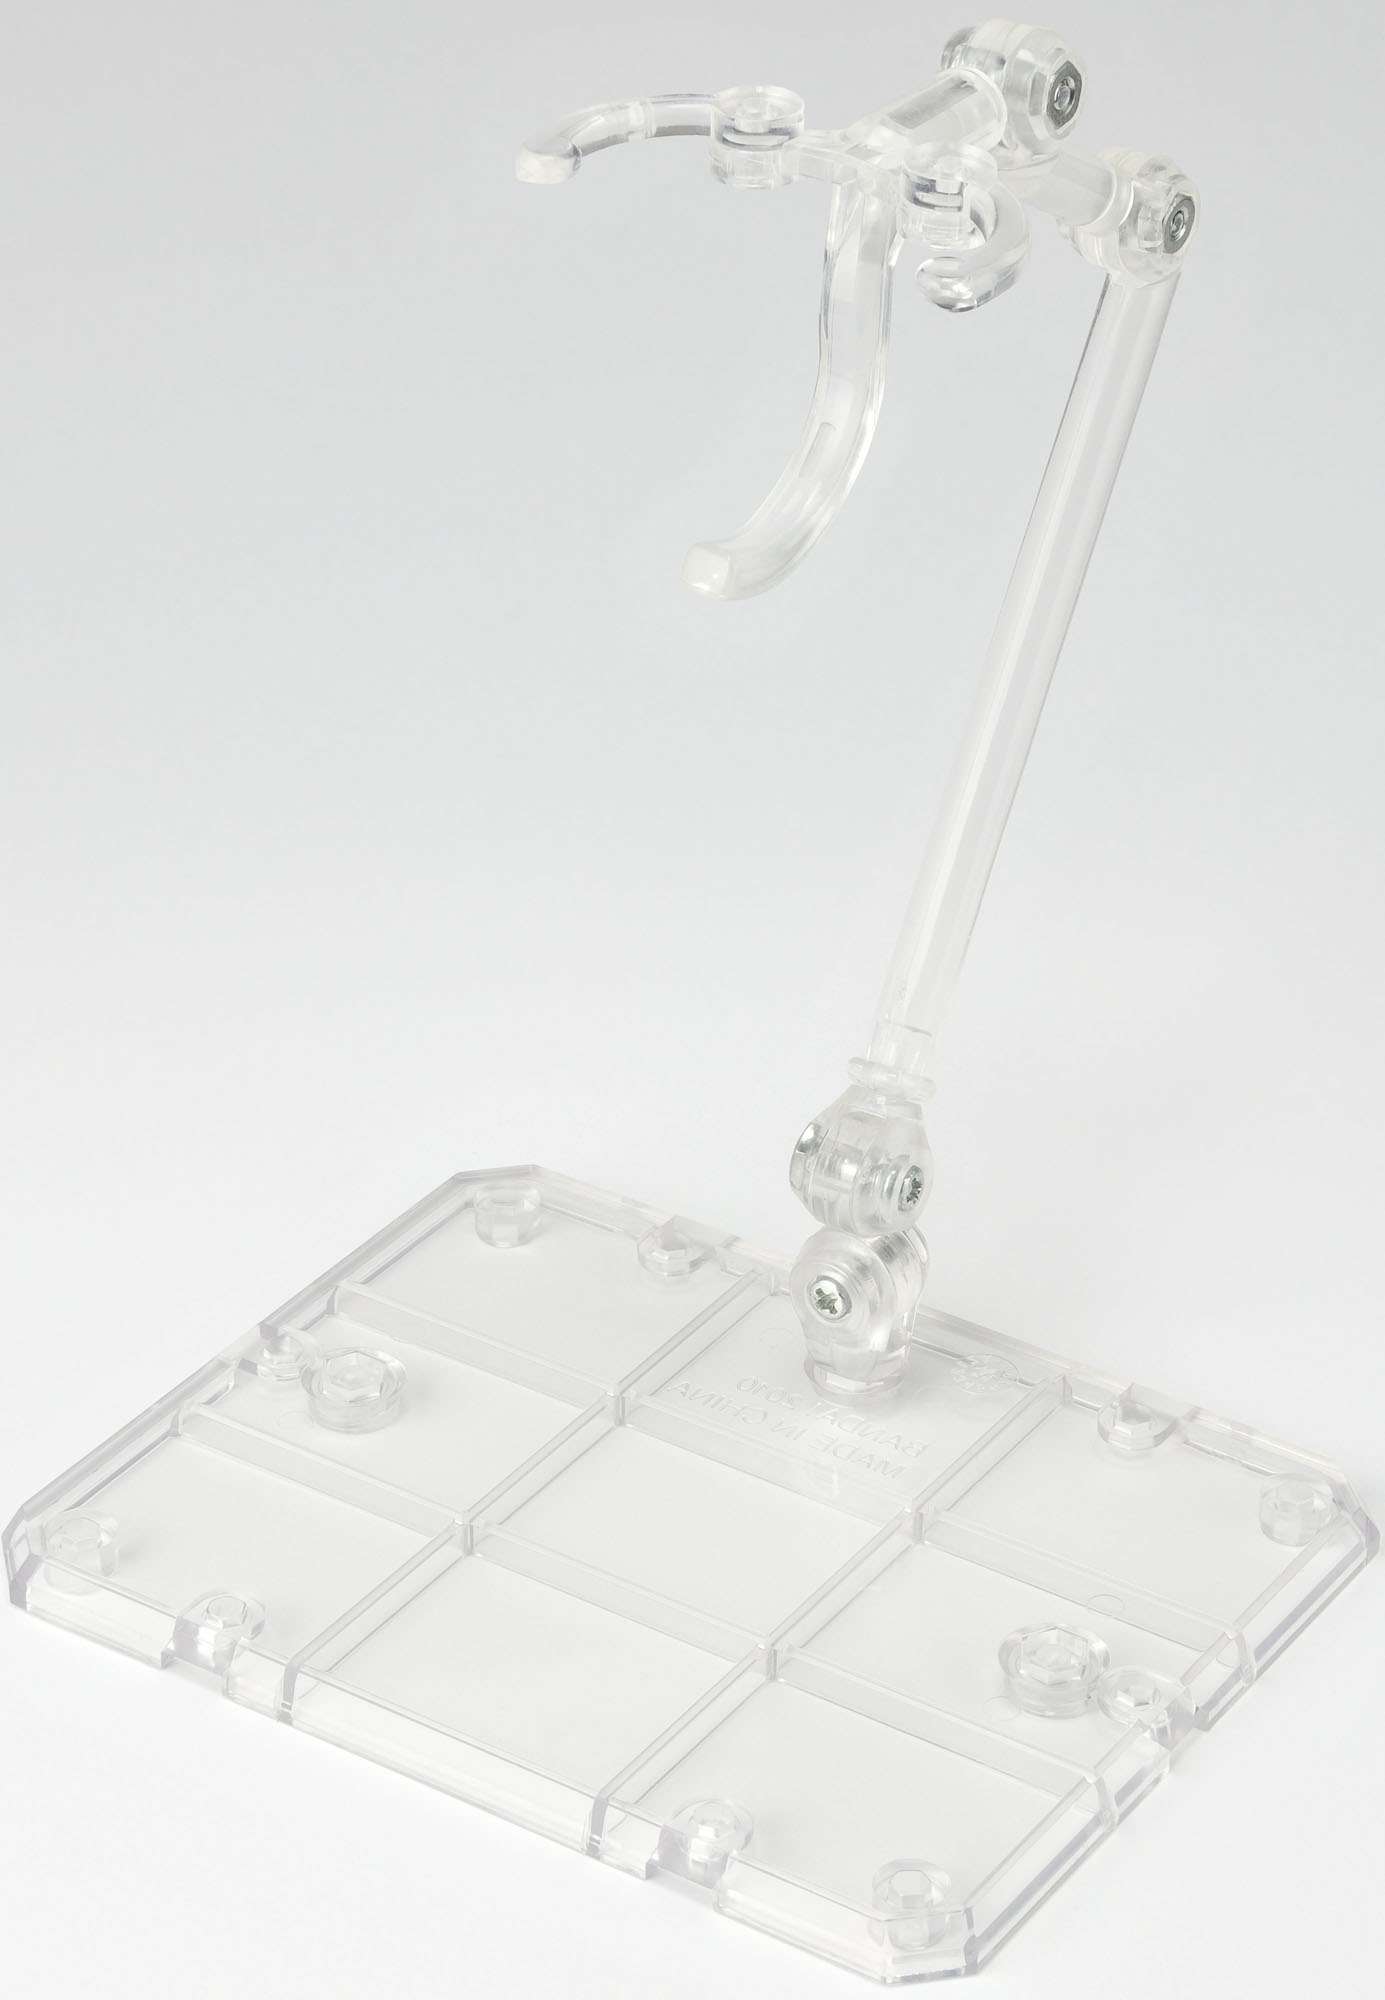 Tamashii Nations - Stage Act. 4 for Humanoid Stand Support (Clear) (2  Stands) - Bandai Spirits Official S.H.Figuarts Stand